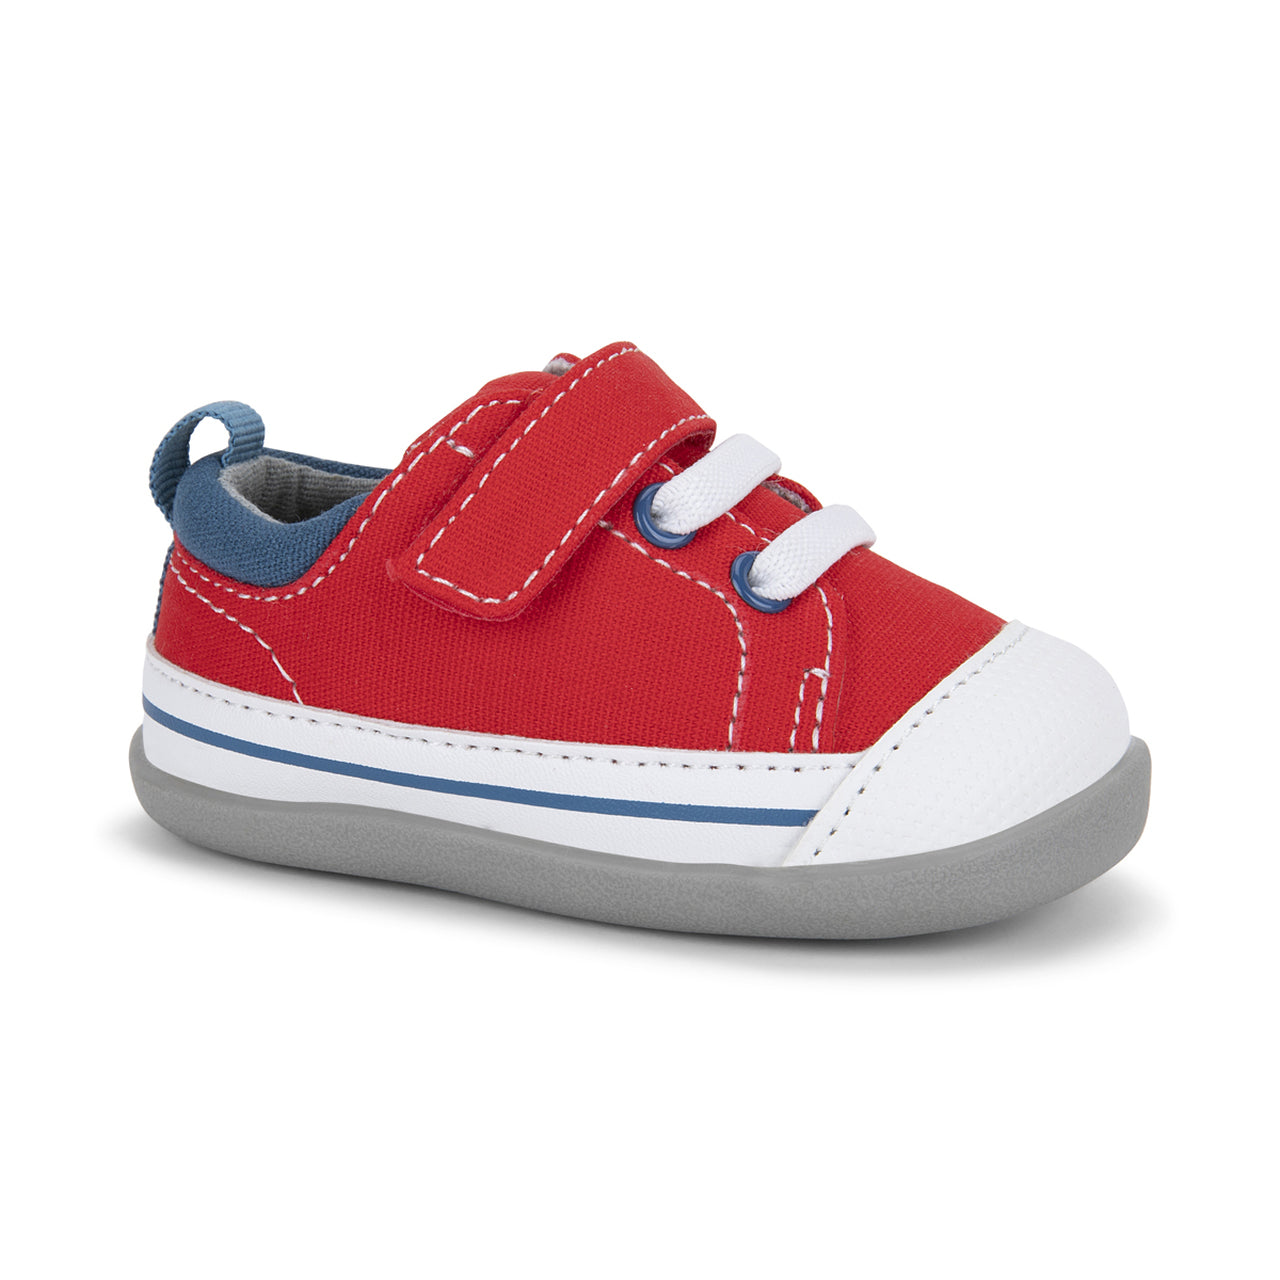 The flexible, lightweight engineering of this classic trainer makes it perfect for boys beginning to walk. The padded collar and tongue will keep feet feeling as good as they look.